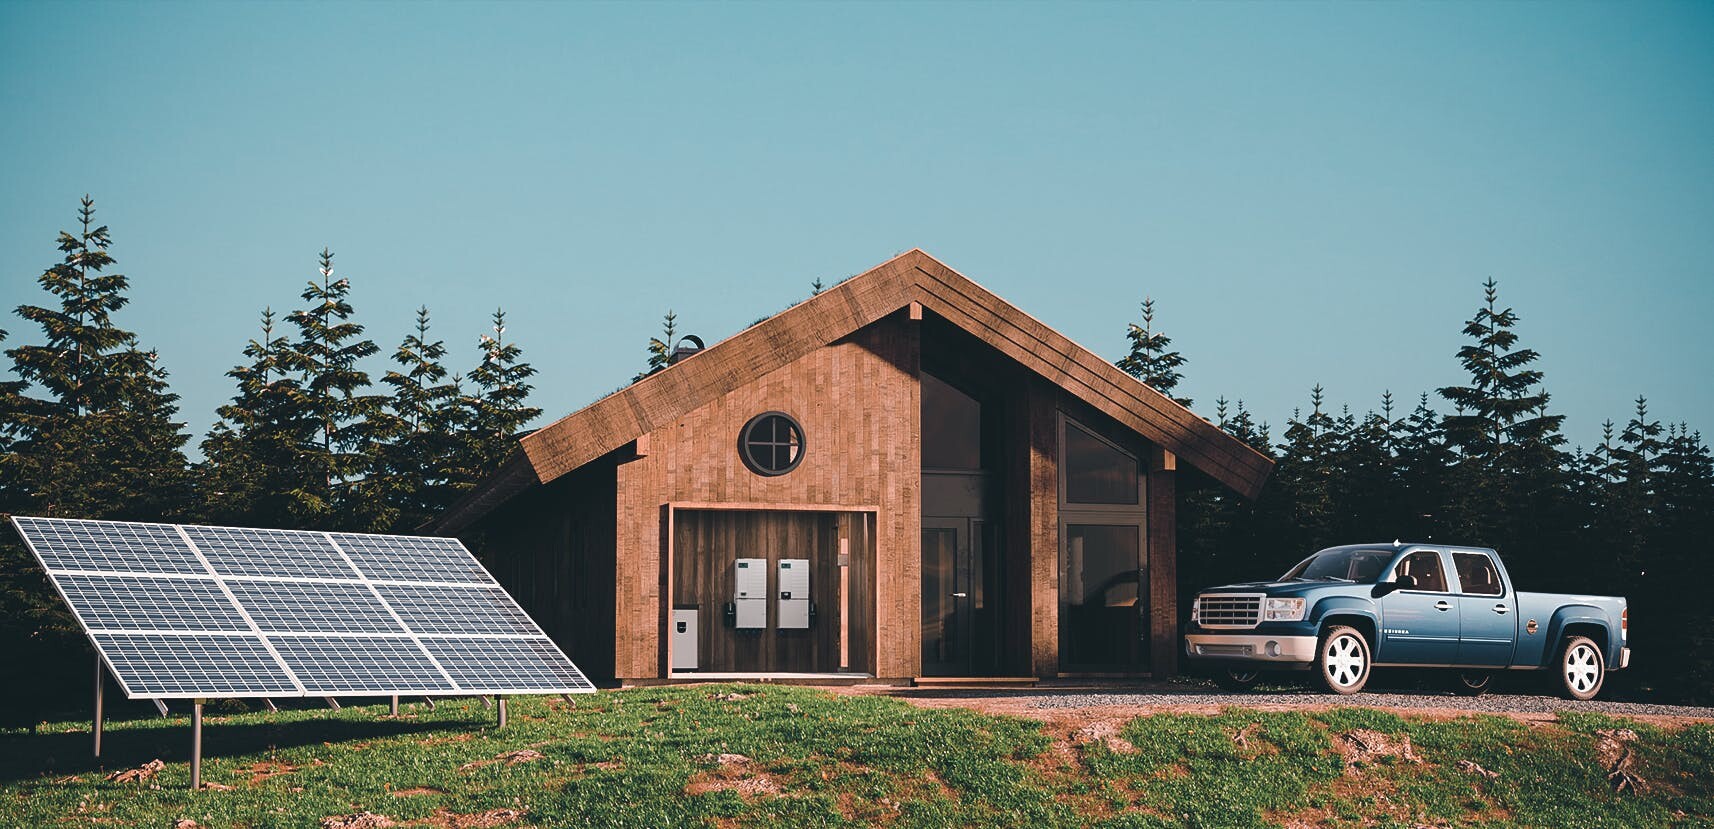 off grid solar home